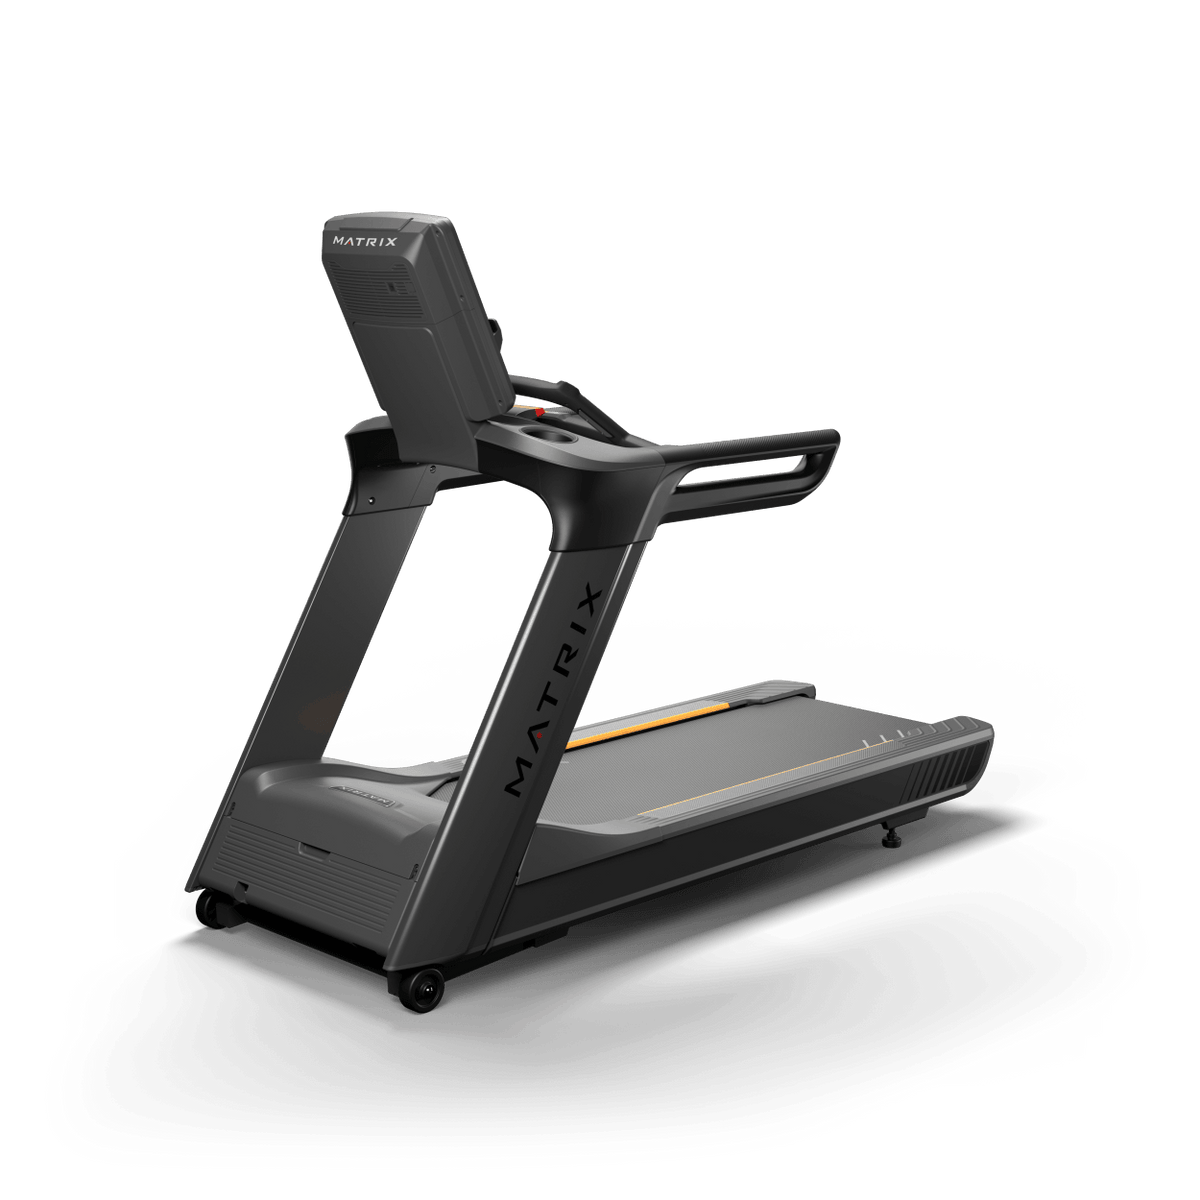 Matrix Performance Treadmill with Touch XL Console rear view | Fitness Experience